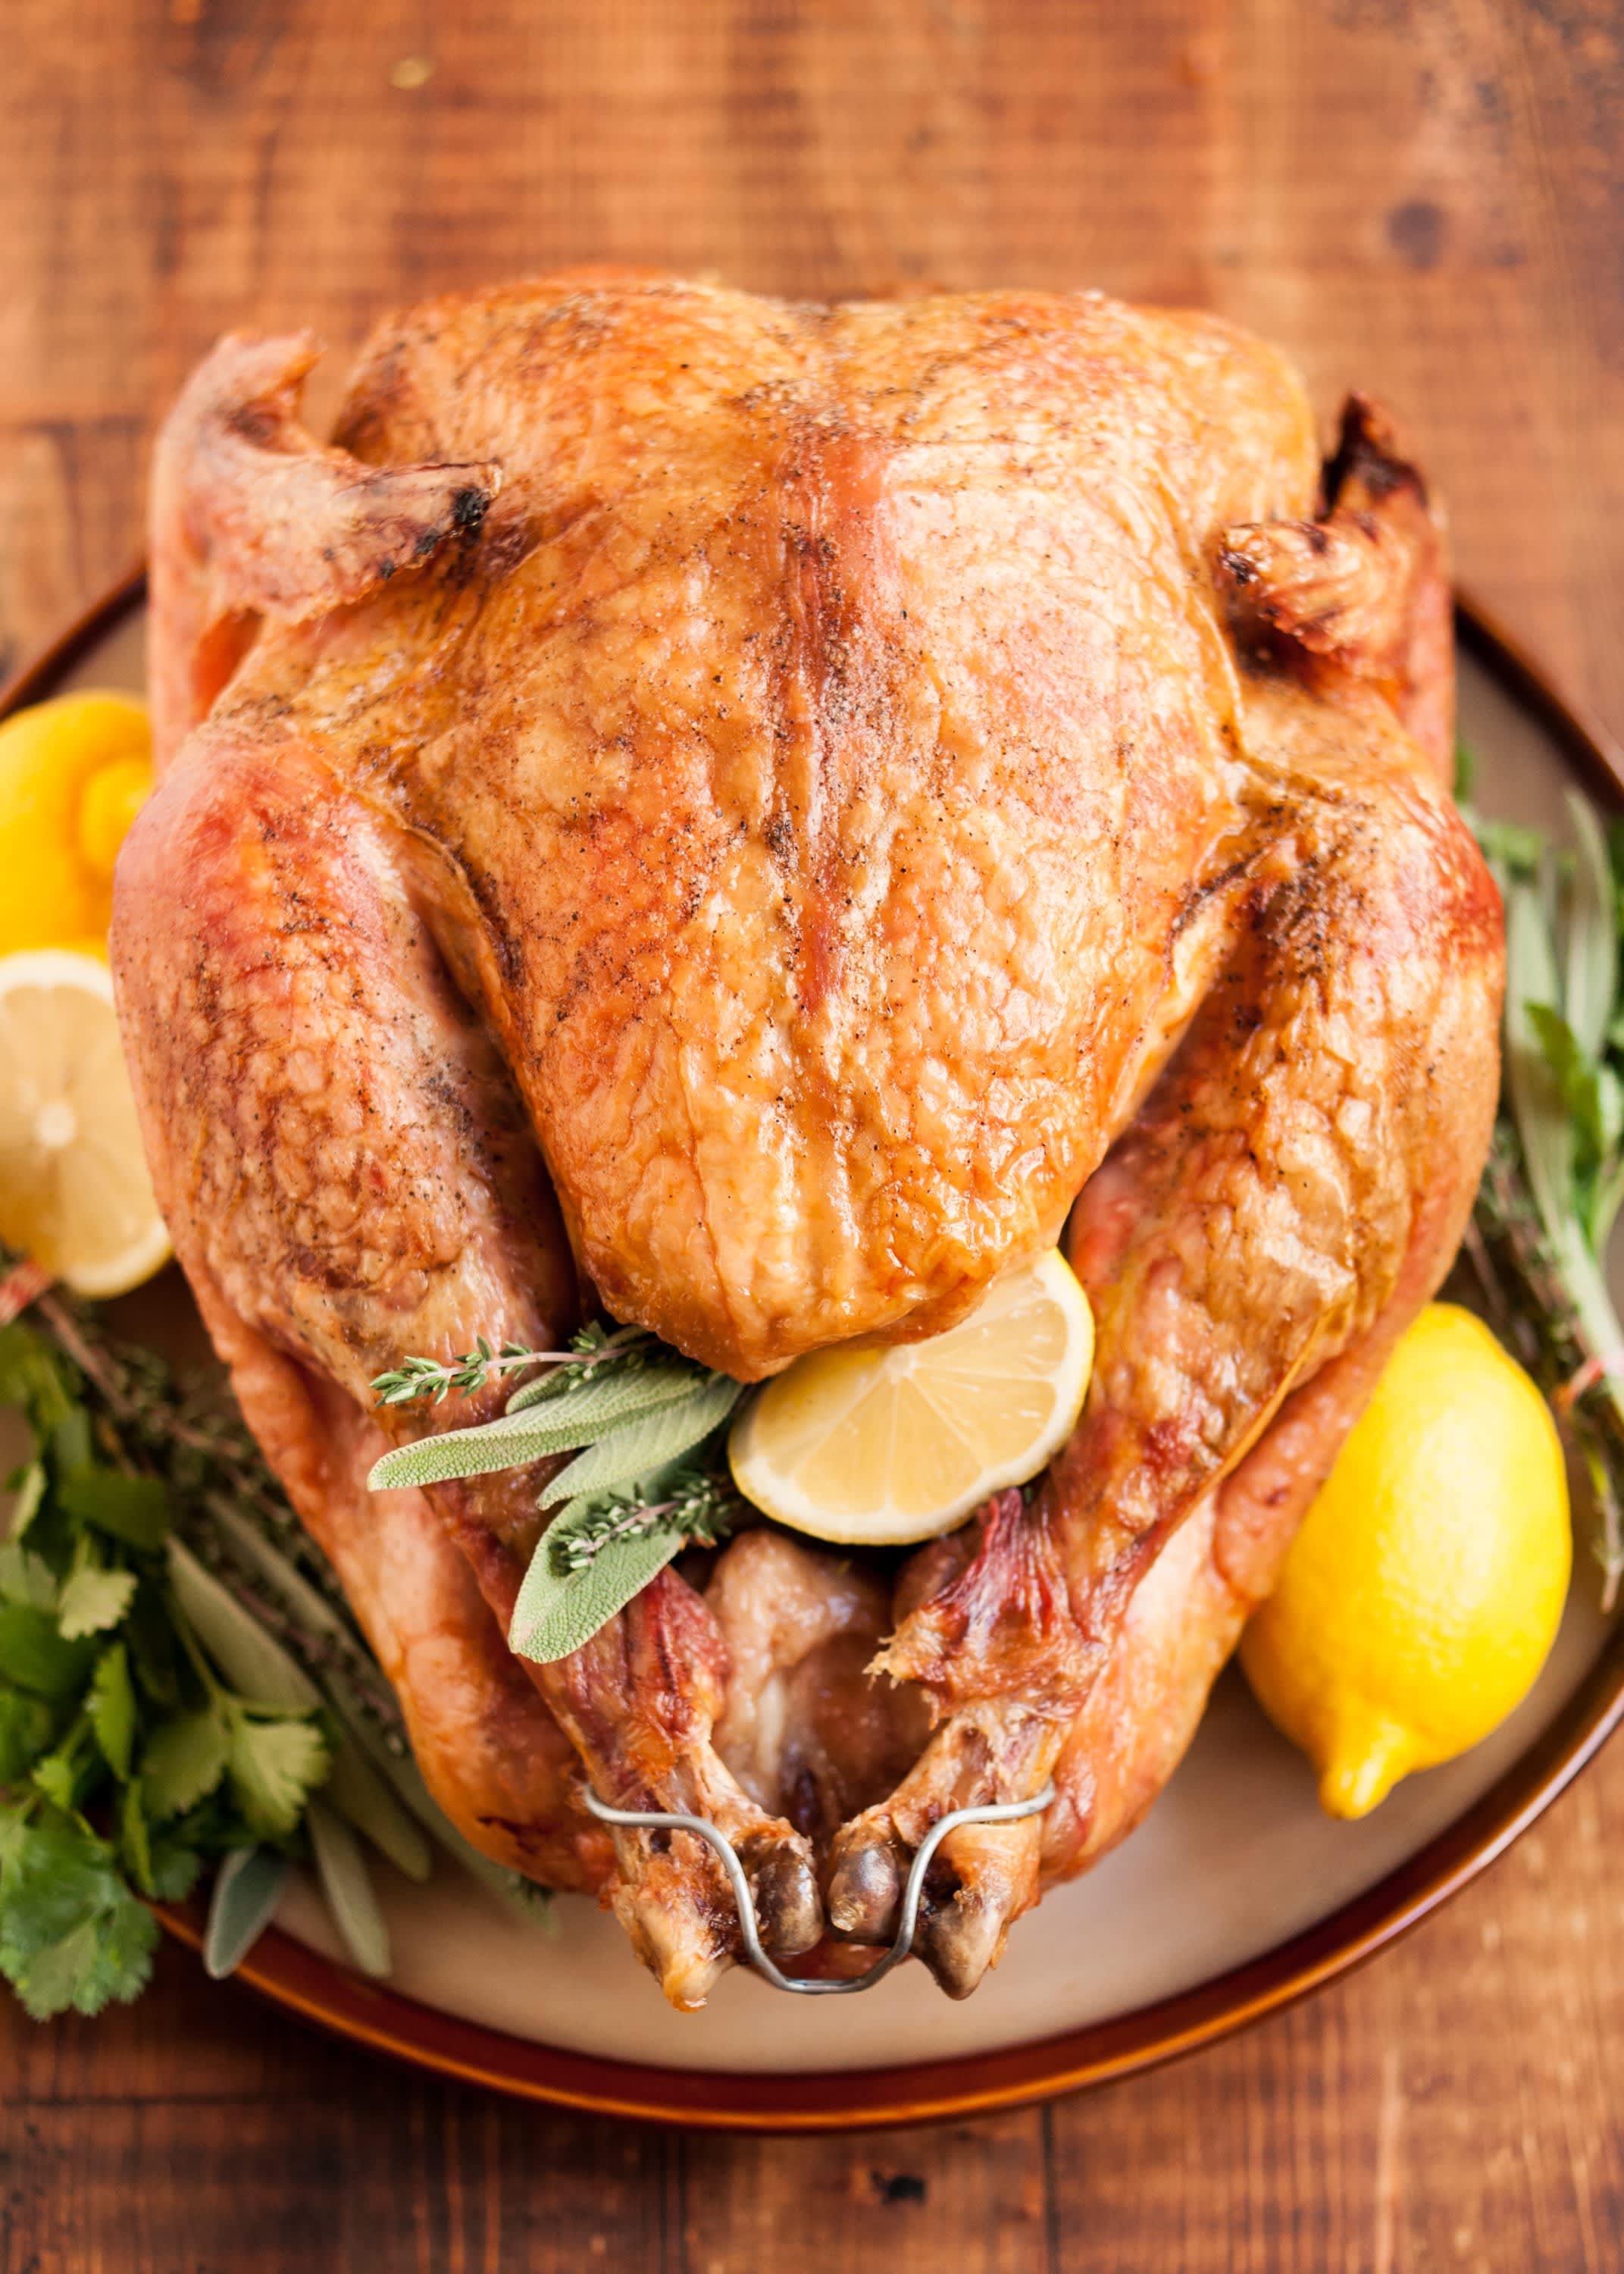 How To Cook a Completely Frozen Turkey for Thanksgiving | Kitchn